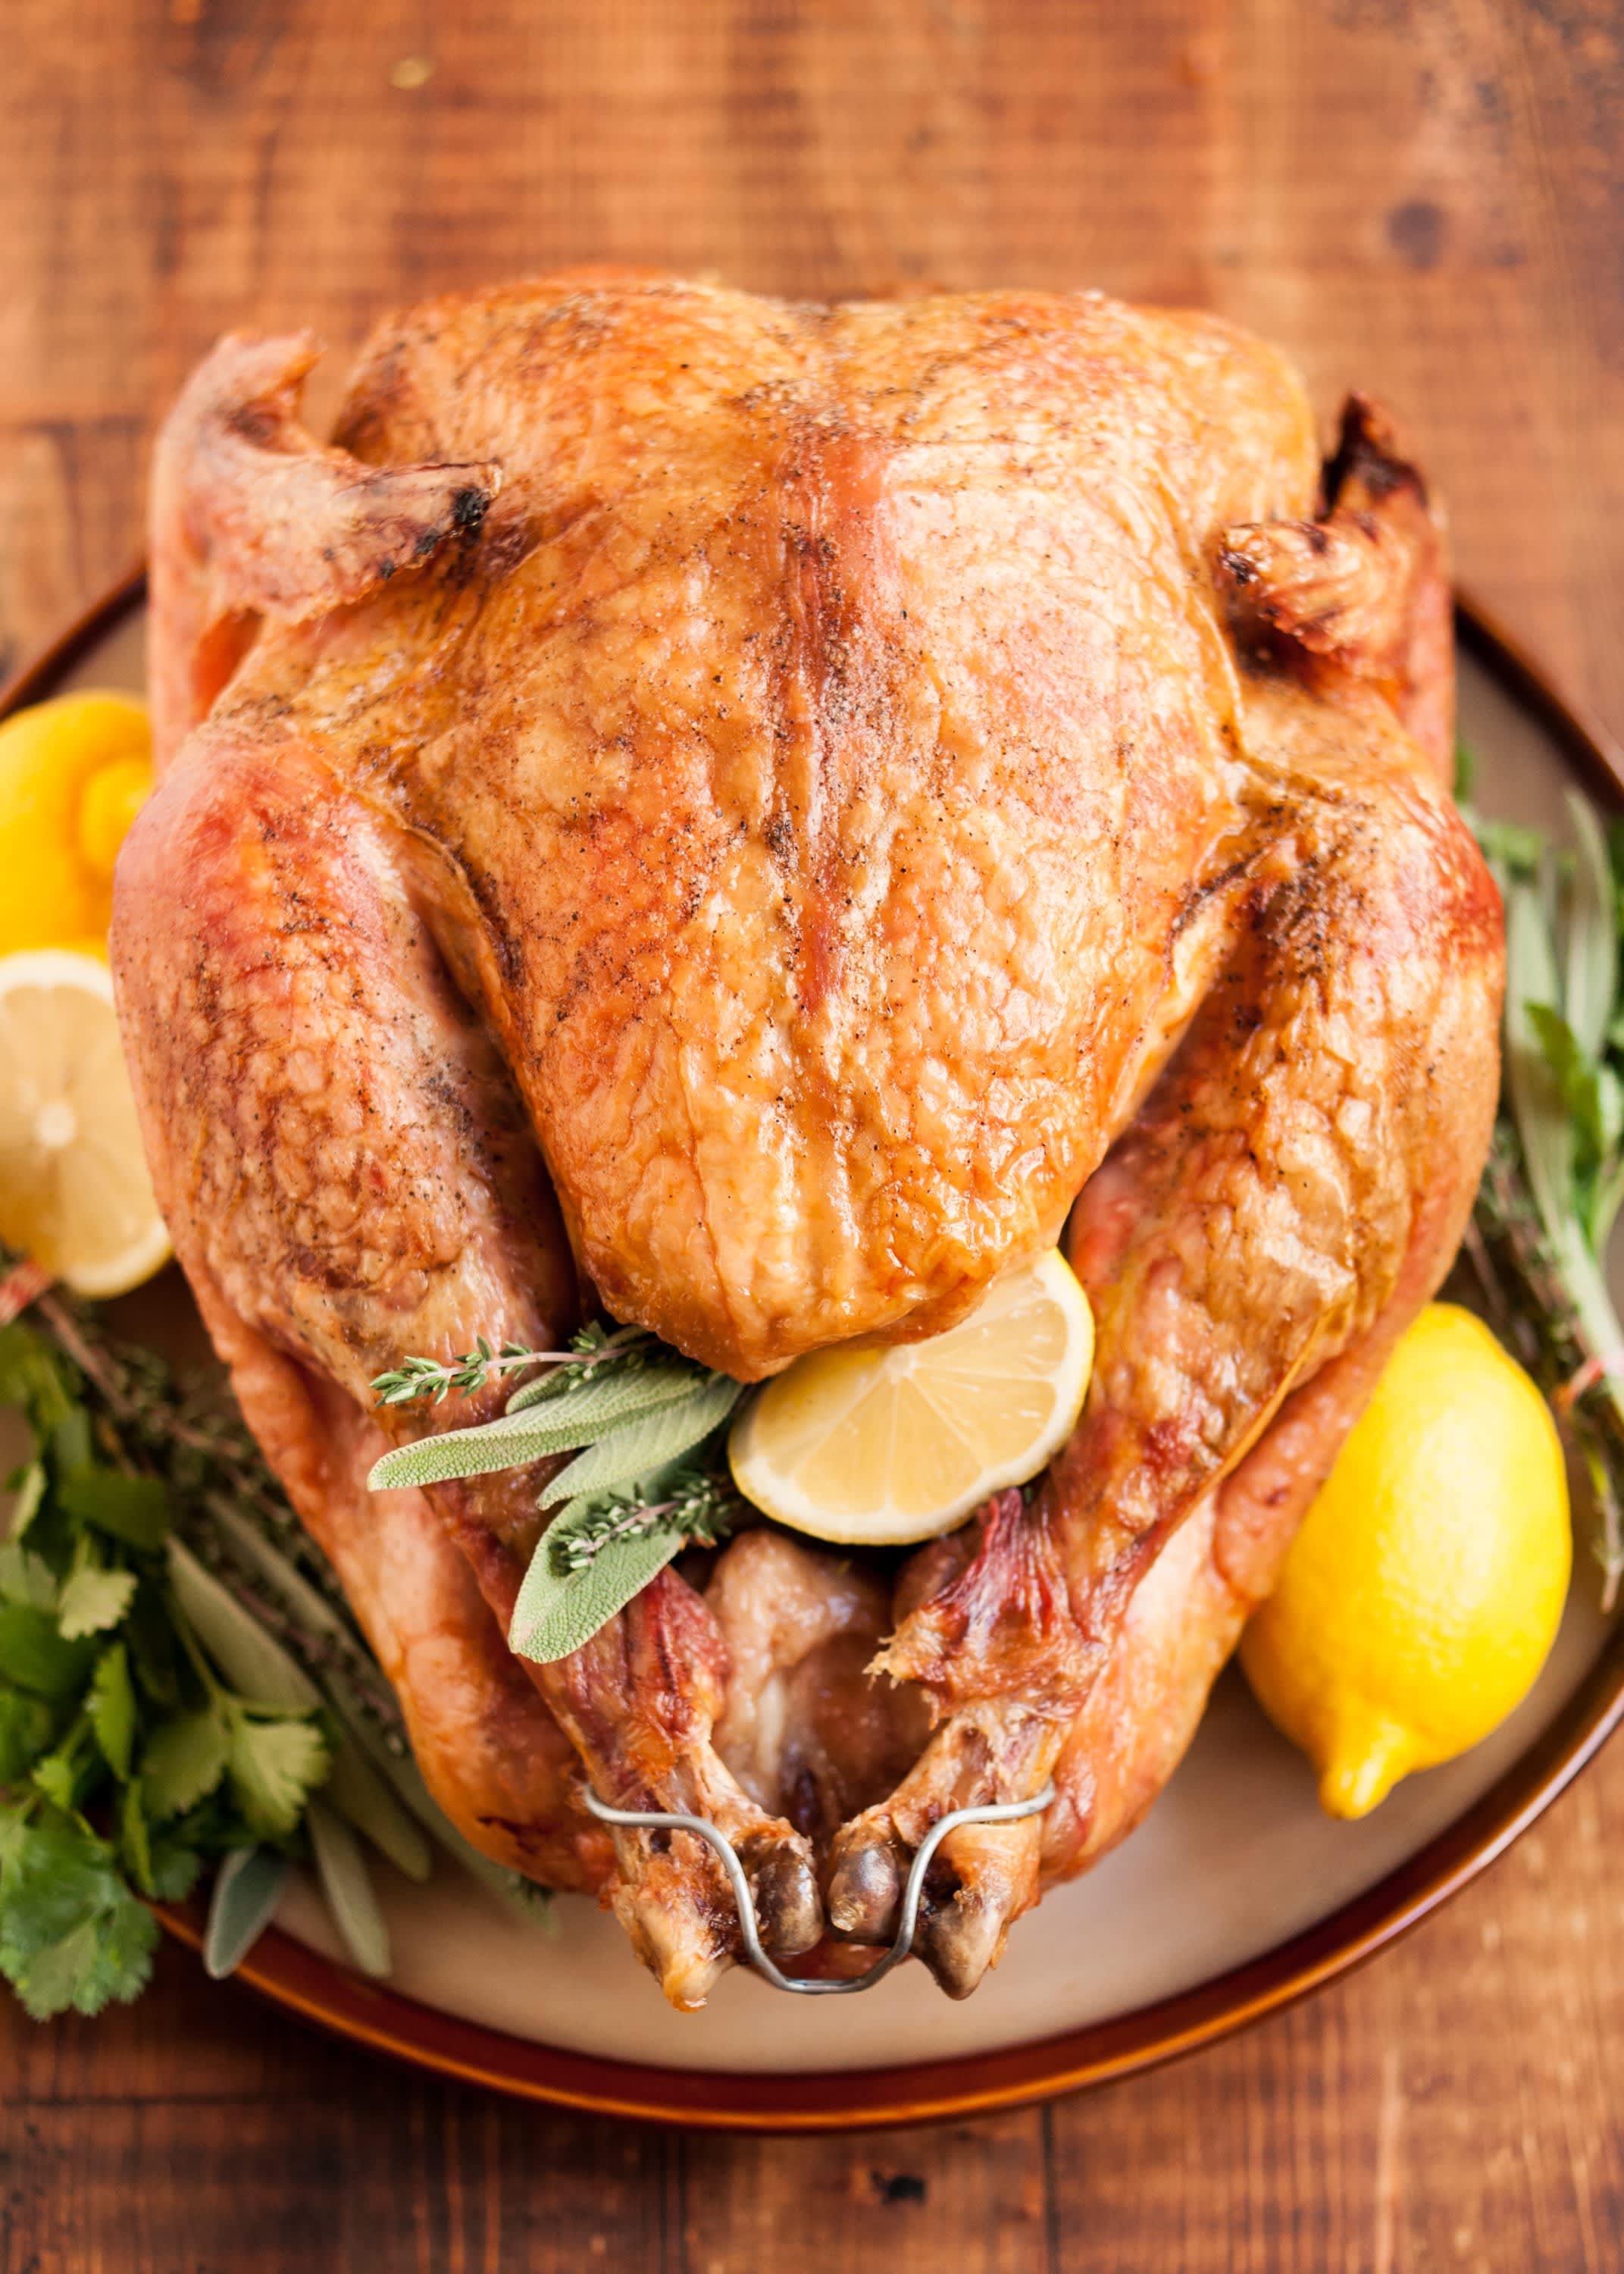 How To Cook a Completely Frozen Turkey for Thanksgiving | Kitchn